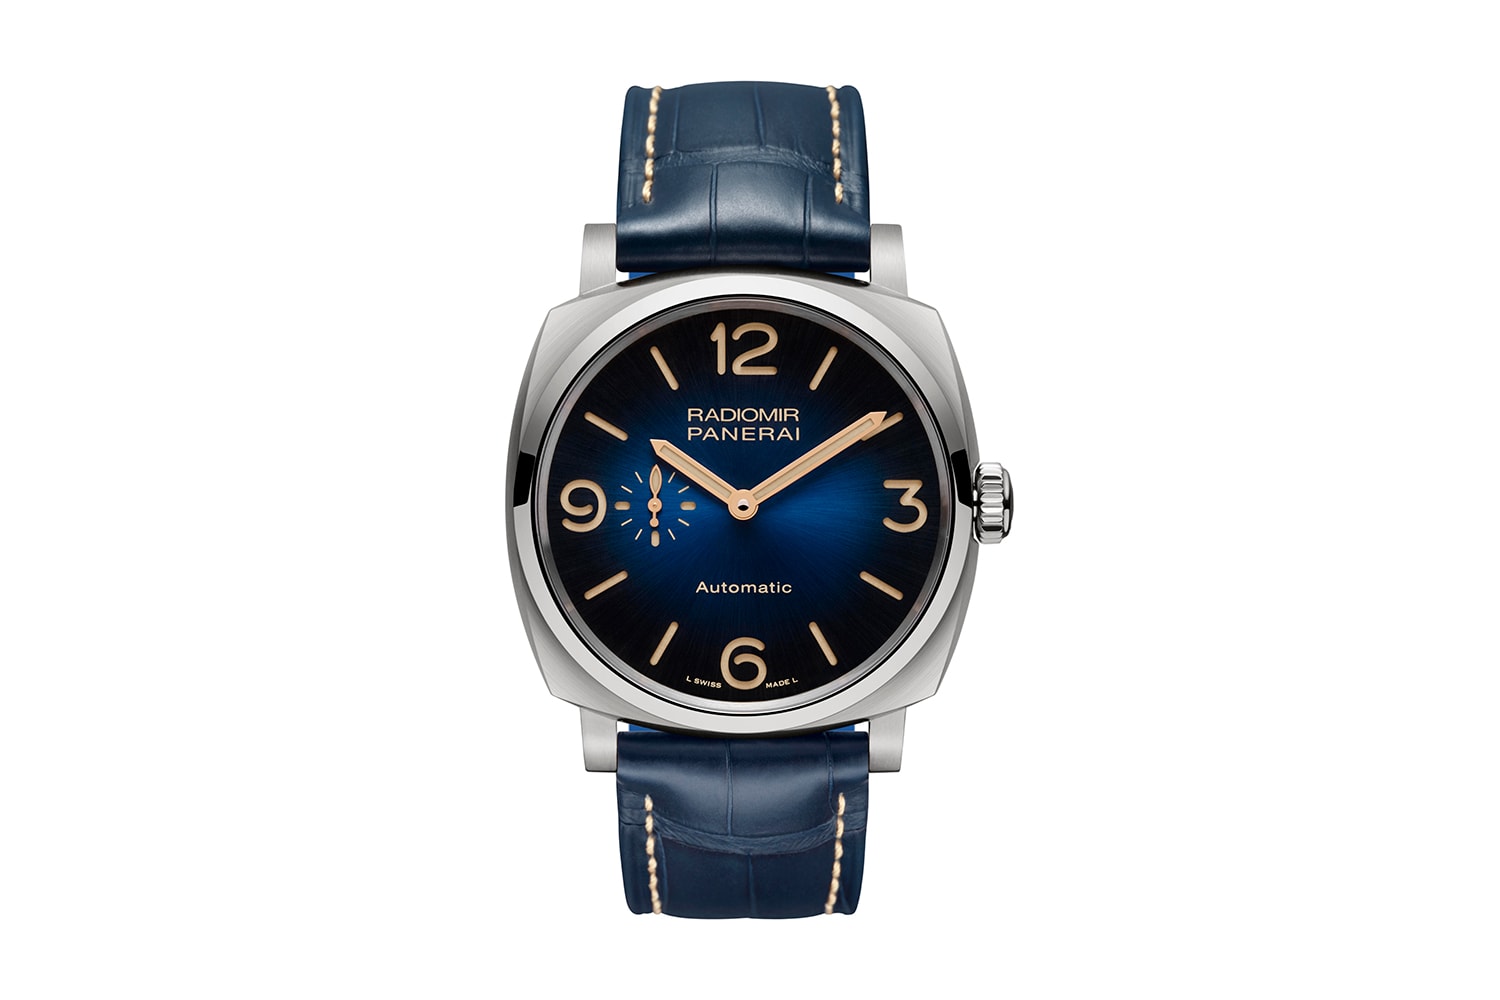 Panerai Radiomir Mediterraneo Collection Info watches Italian carbon dive watches military 